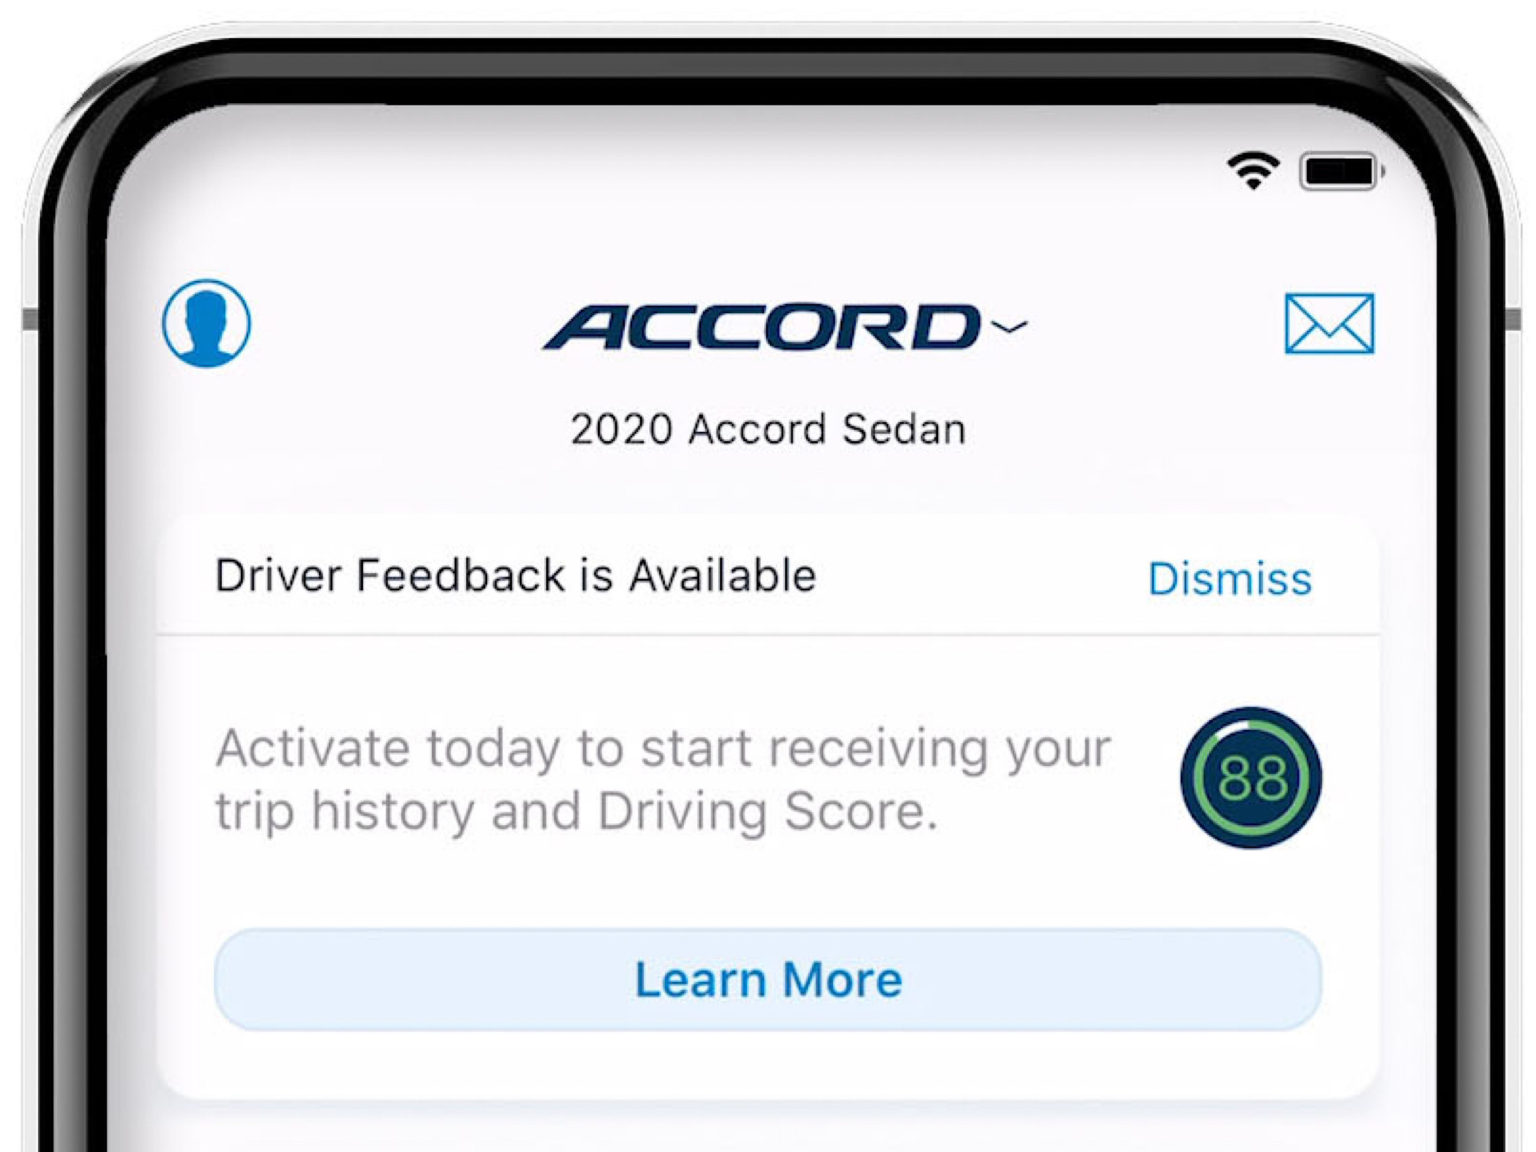 Honda and Acura are giving customers the opportunity to get feedback on their driving habits.